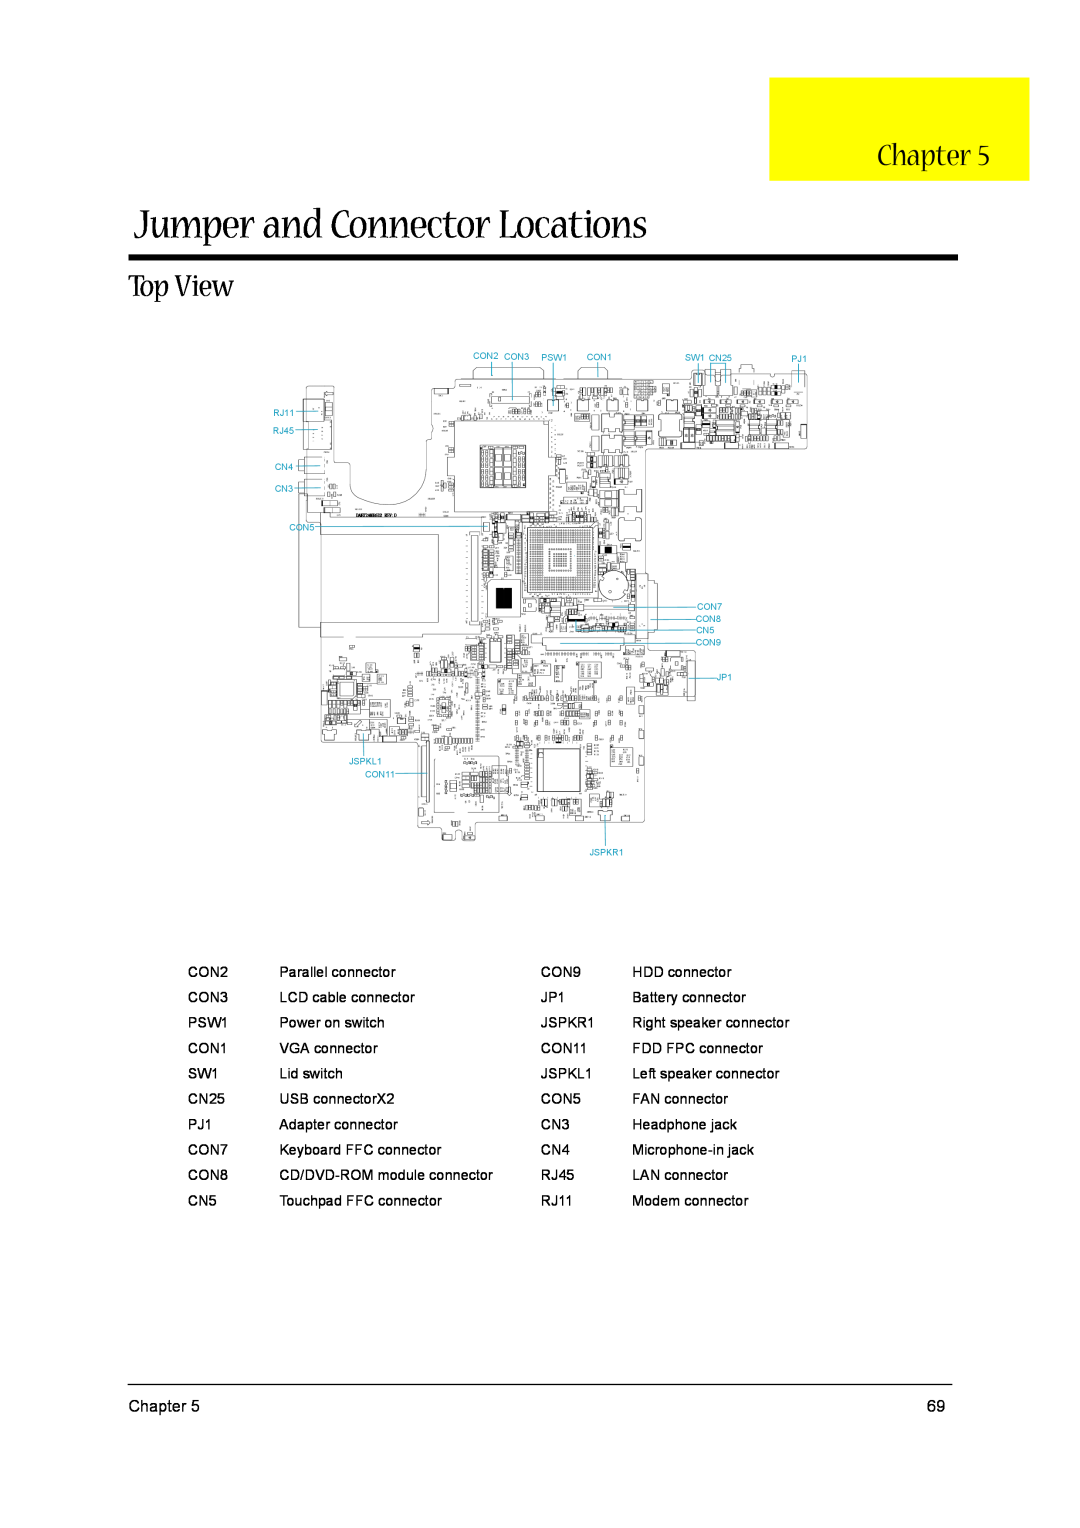 Acer 1300 Series manual Jumper and Connector Locations, Top View, Chapter 